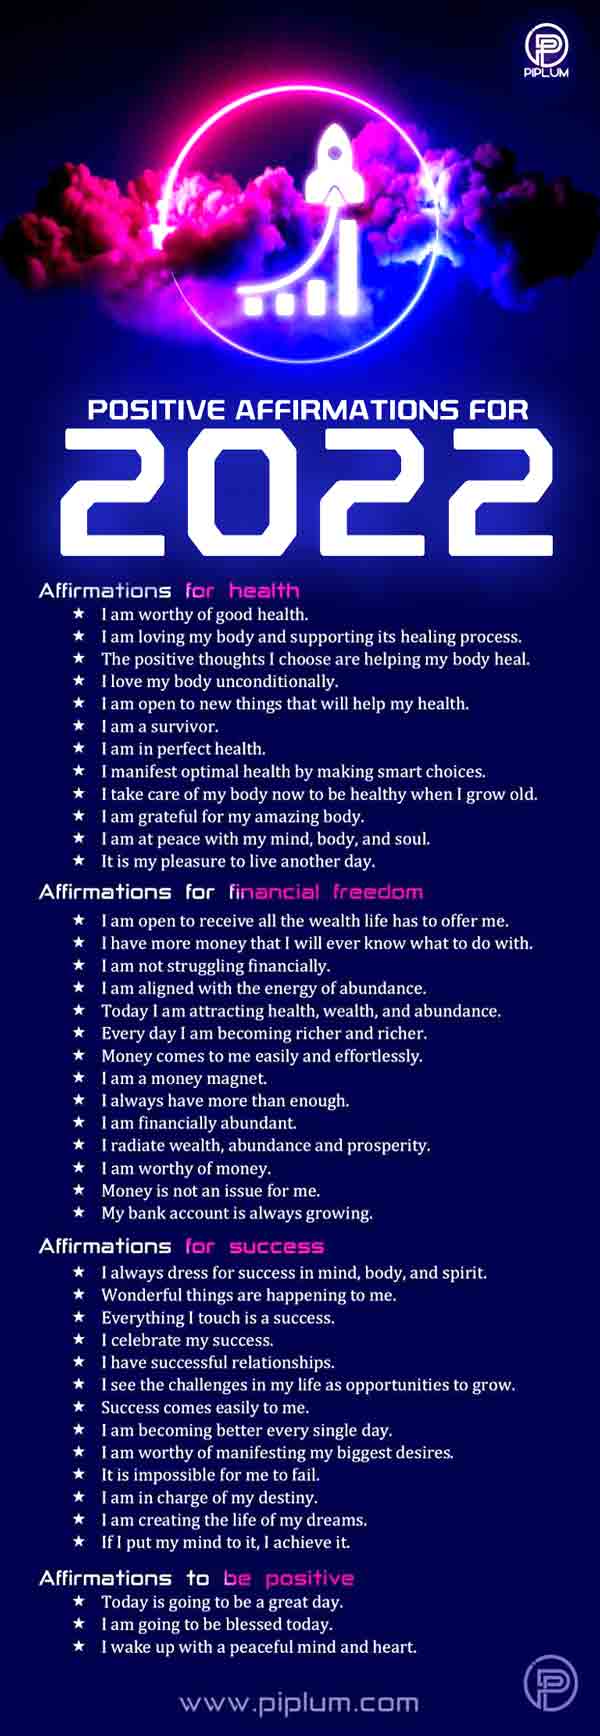 Positive-affirmations-for-successful-New-Year-2022-goals-and-resolutions 